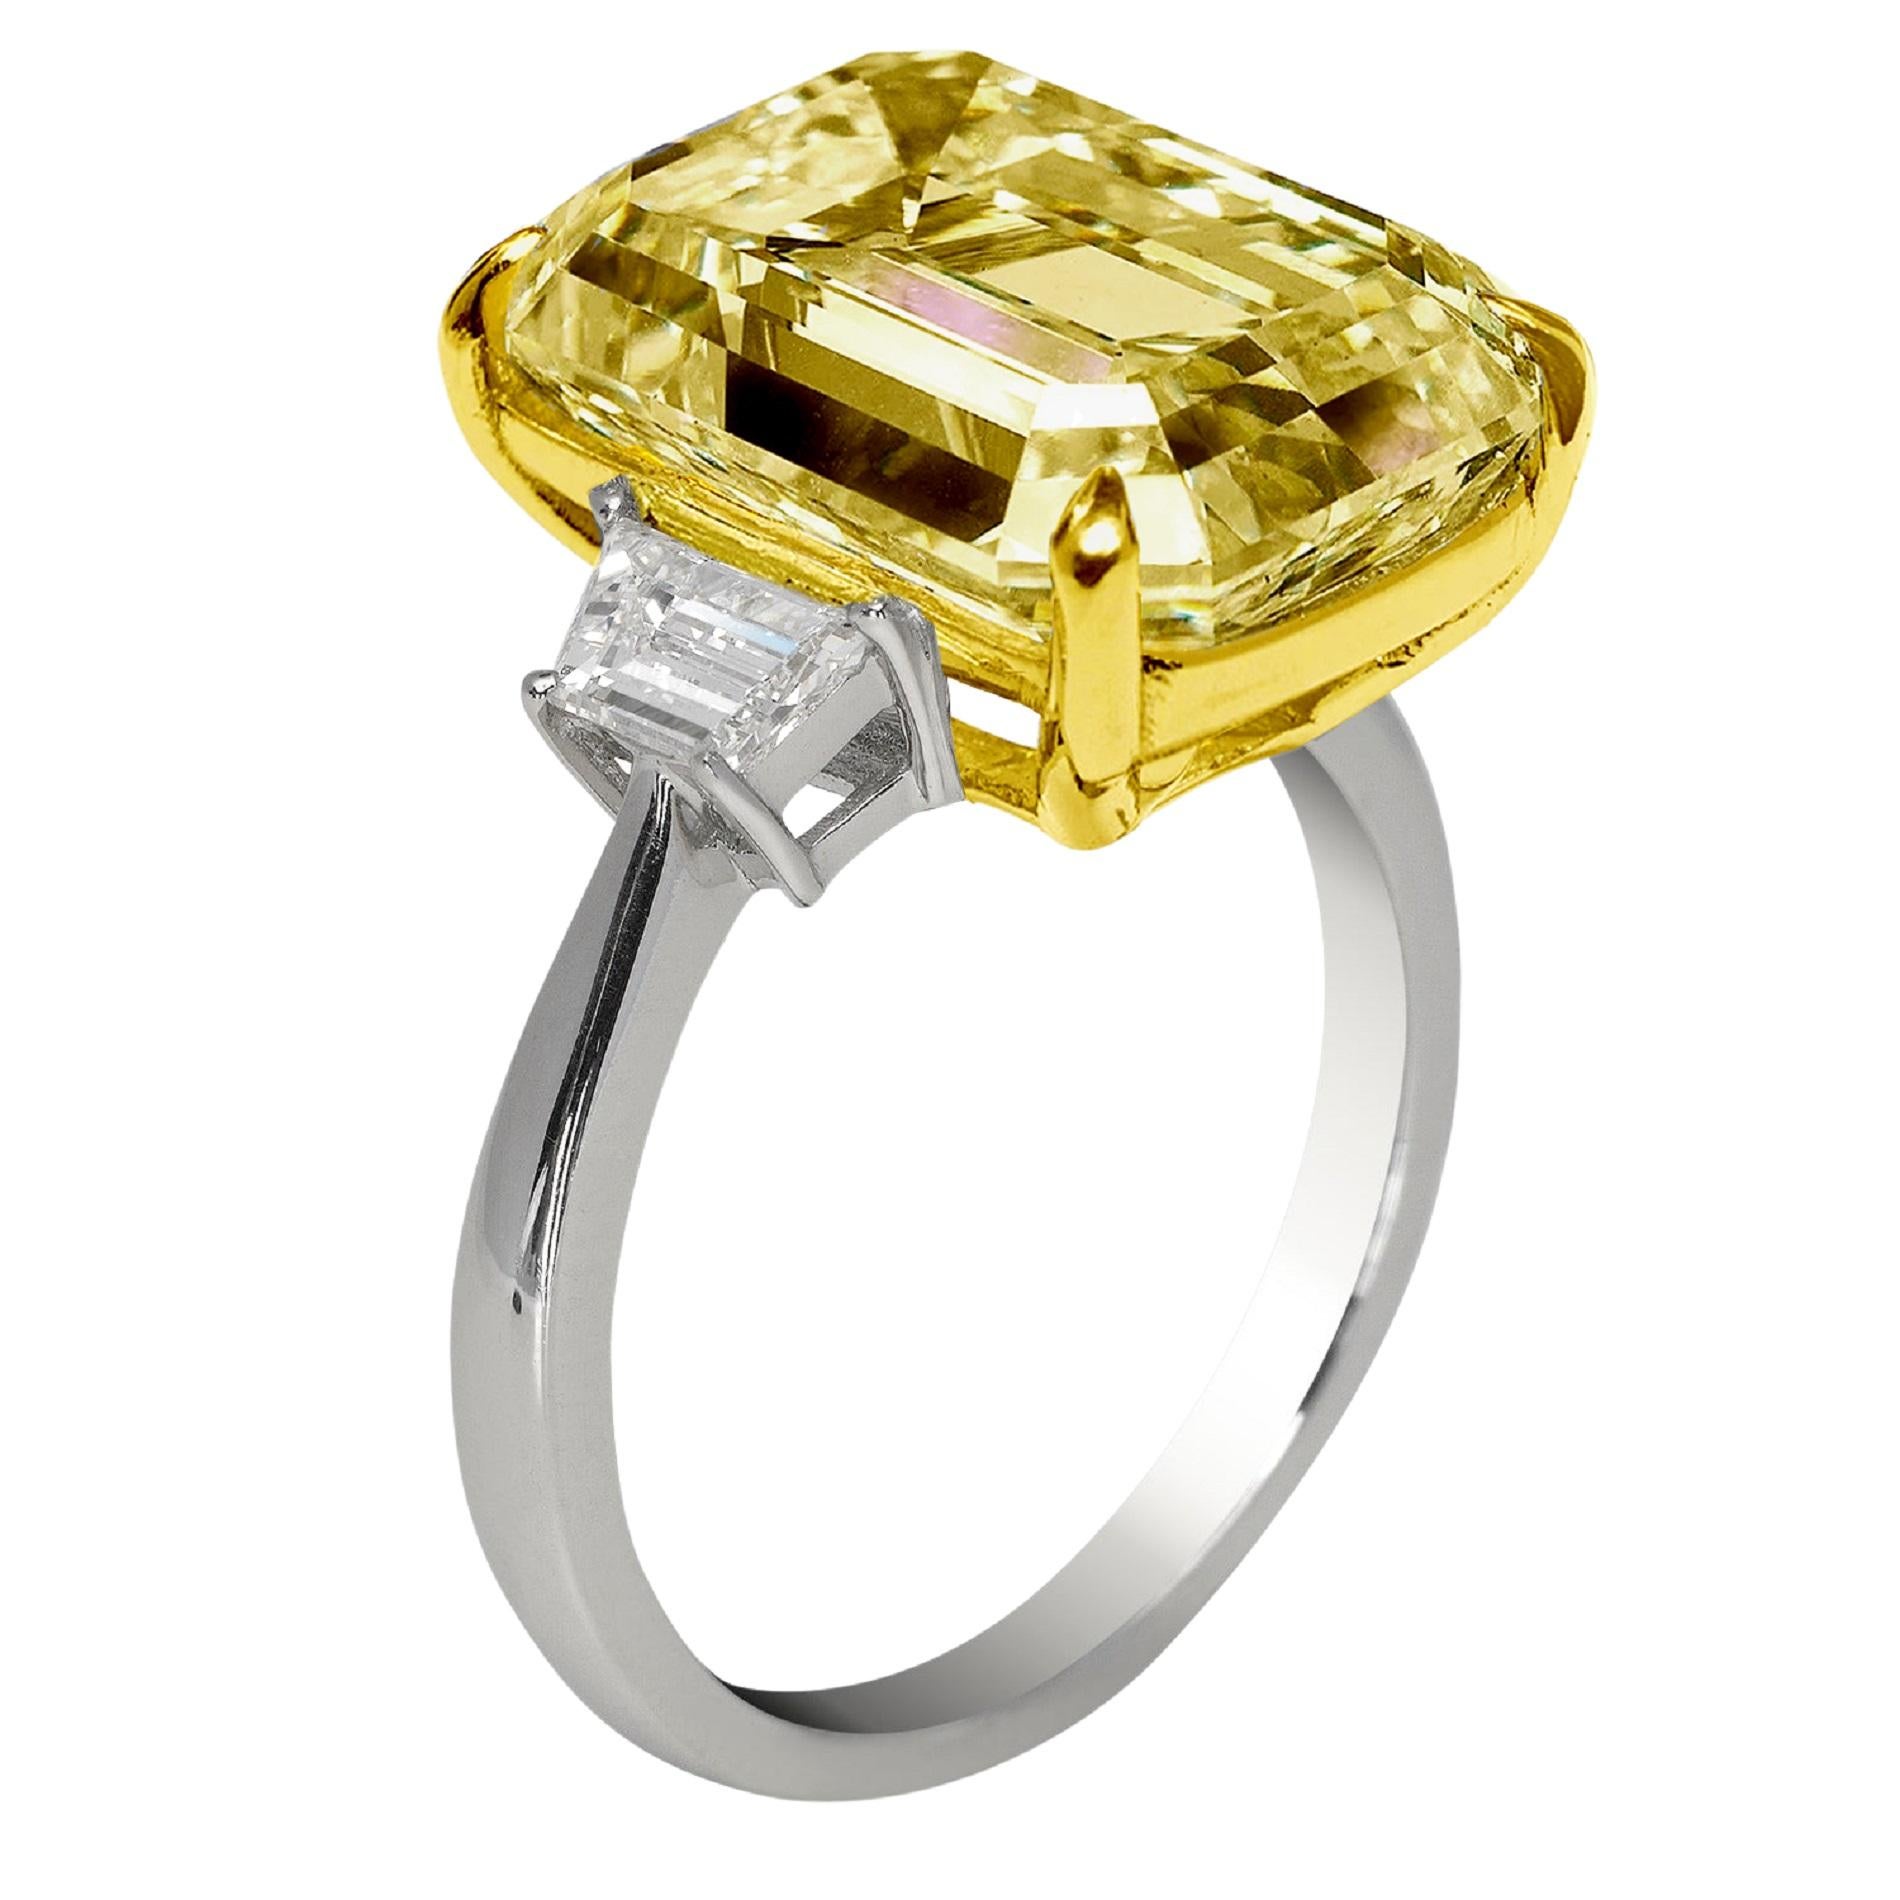 An exquisite 7 carat fancy intense yellow 10 carat emerald cut diamond ring set in platinum and 18 carats yellow gold

the ring has been handmade in Italy with two side tapered baguettes also 100% eye clean and full of brilliance!

the diamond comes